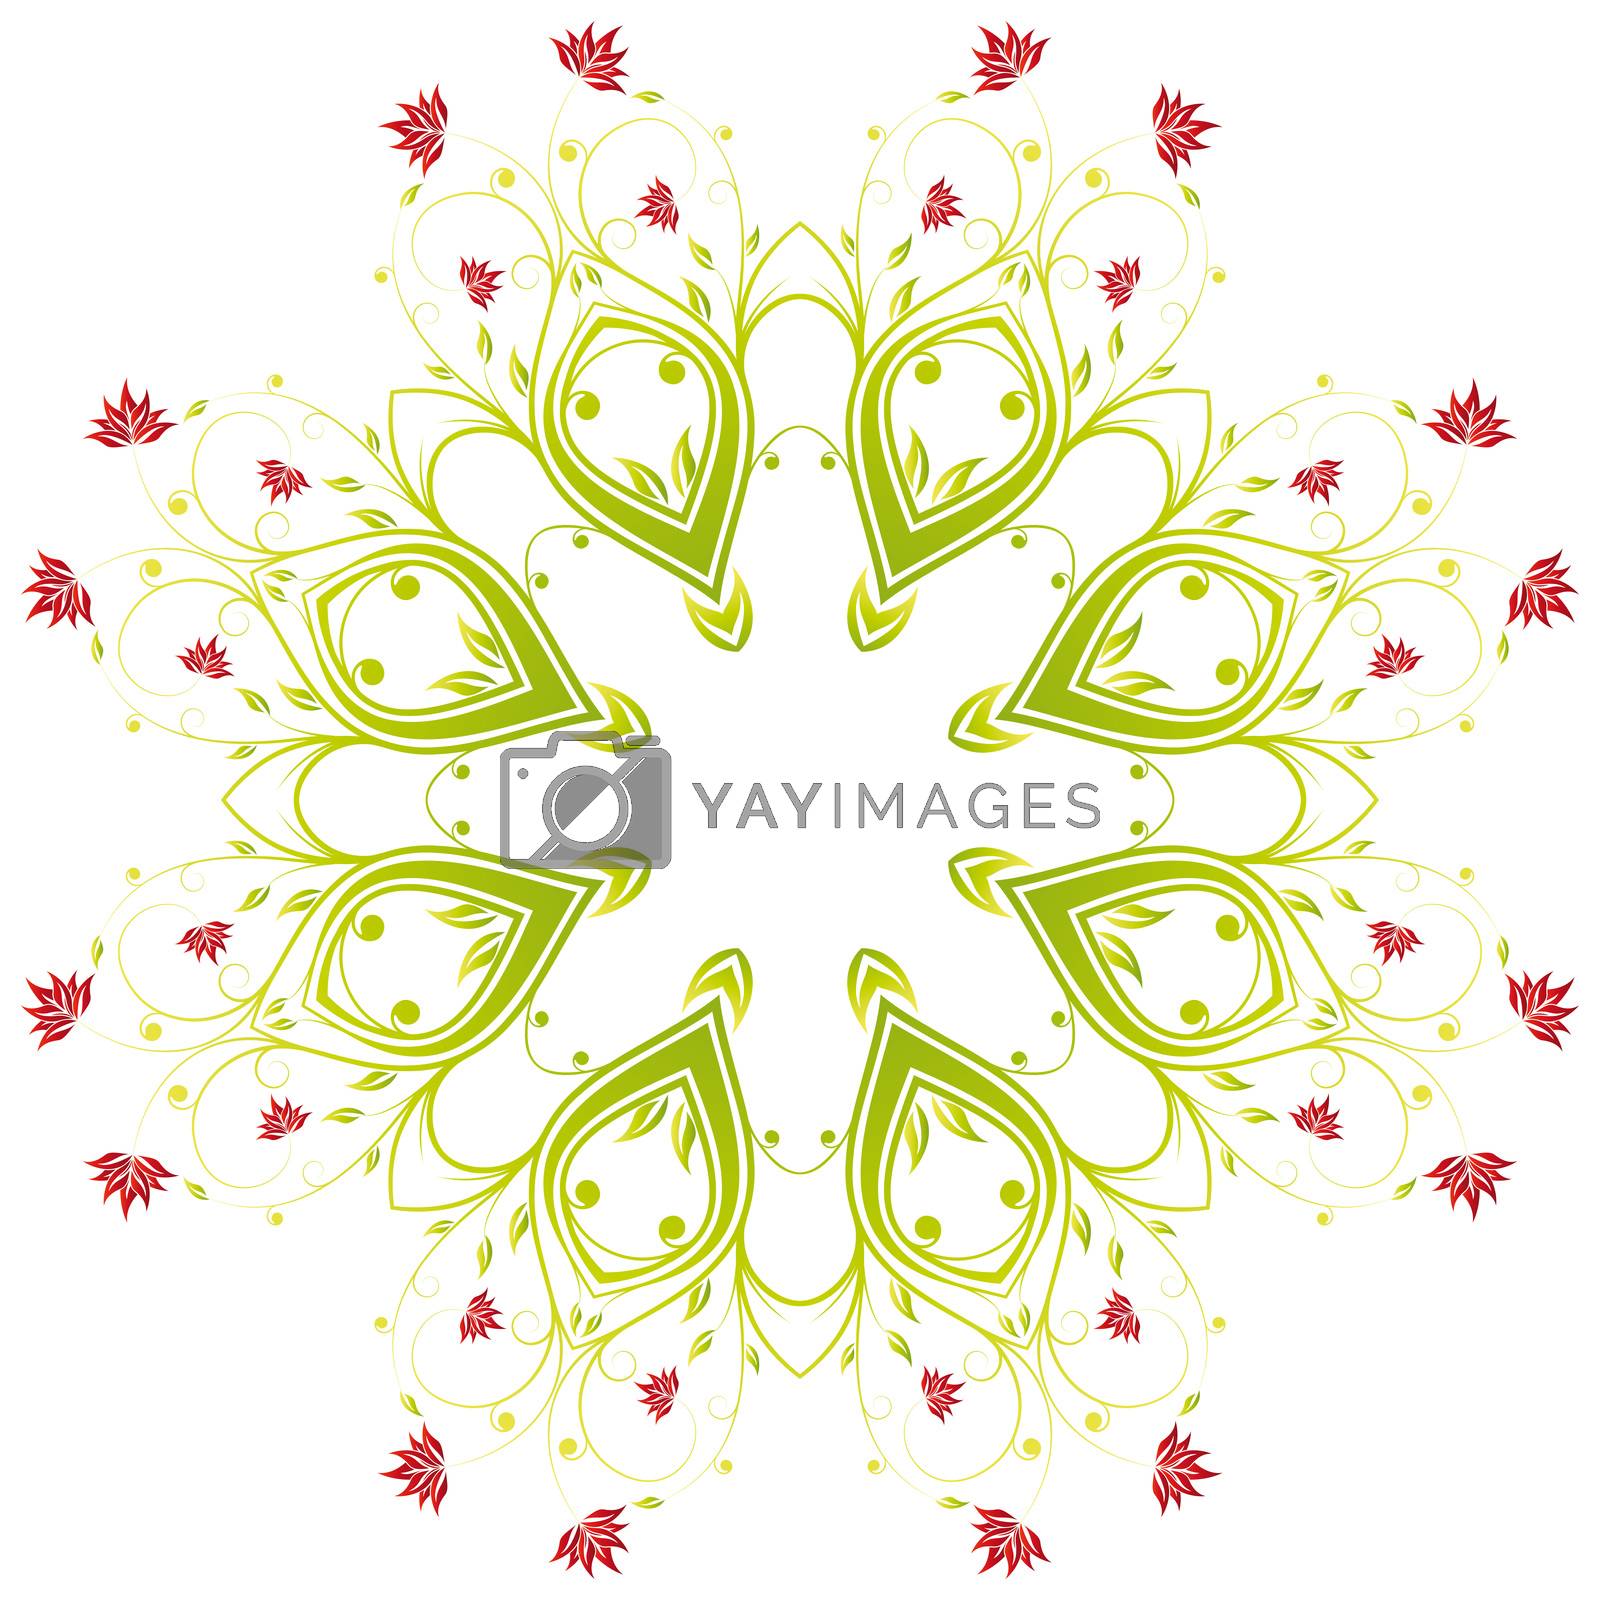 Royalty free image of Vector Flowers by WaD